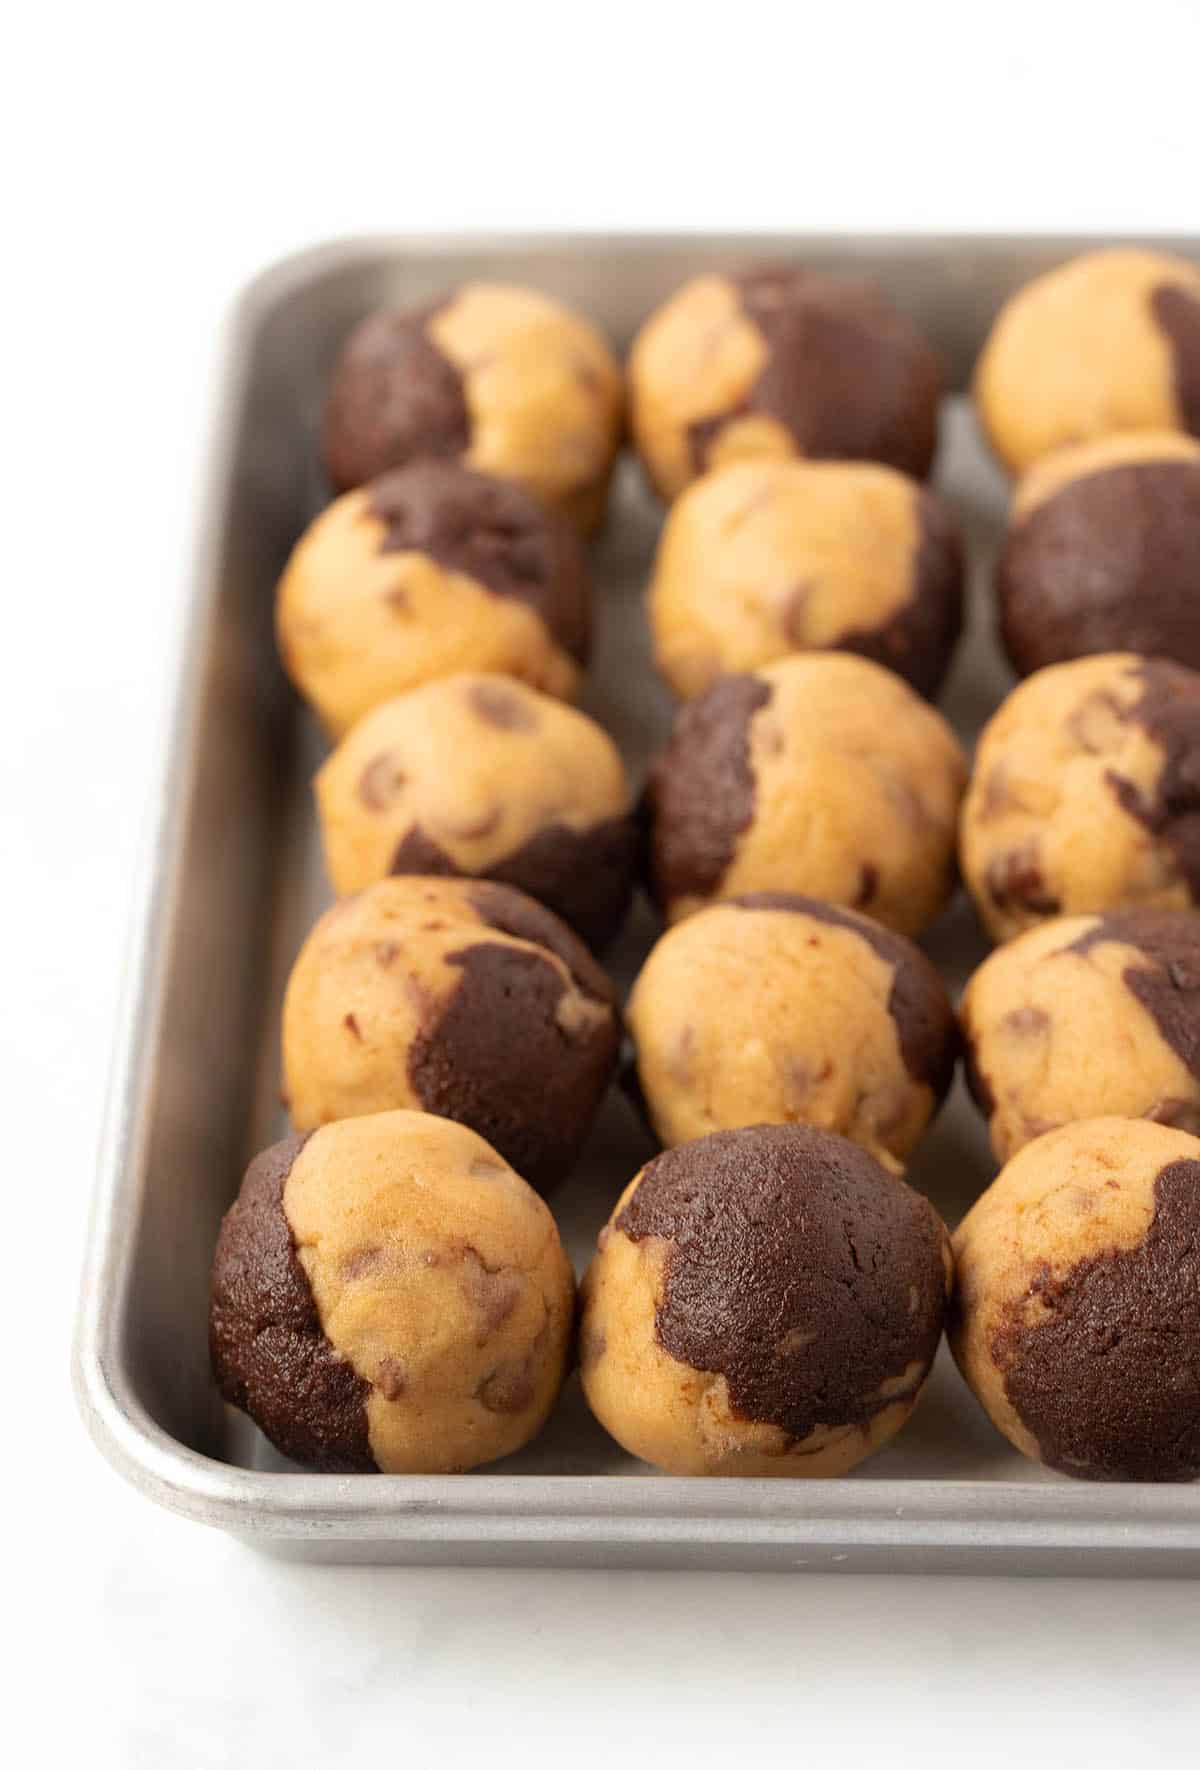 Rolled balls of cookie dough on a silver baking tray. 